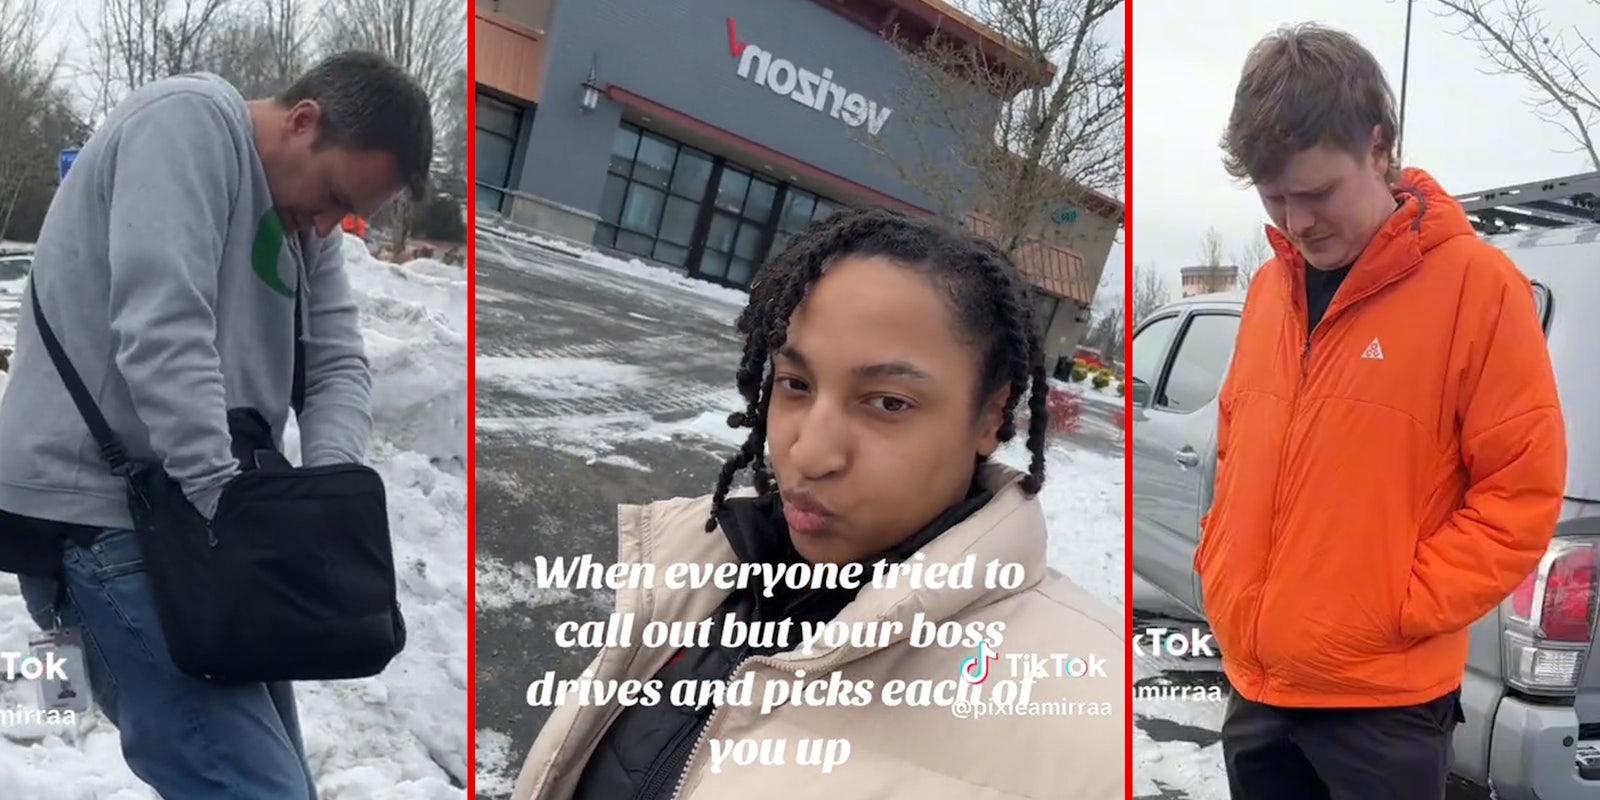 man searching bag (l) young woman outside Verizon store with caption 'When everyone tried to call out but your boss drives and picks each of you up' (c) young man looking down distraught (r)